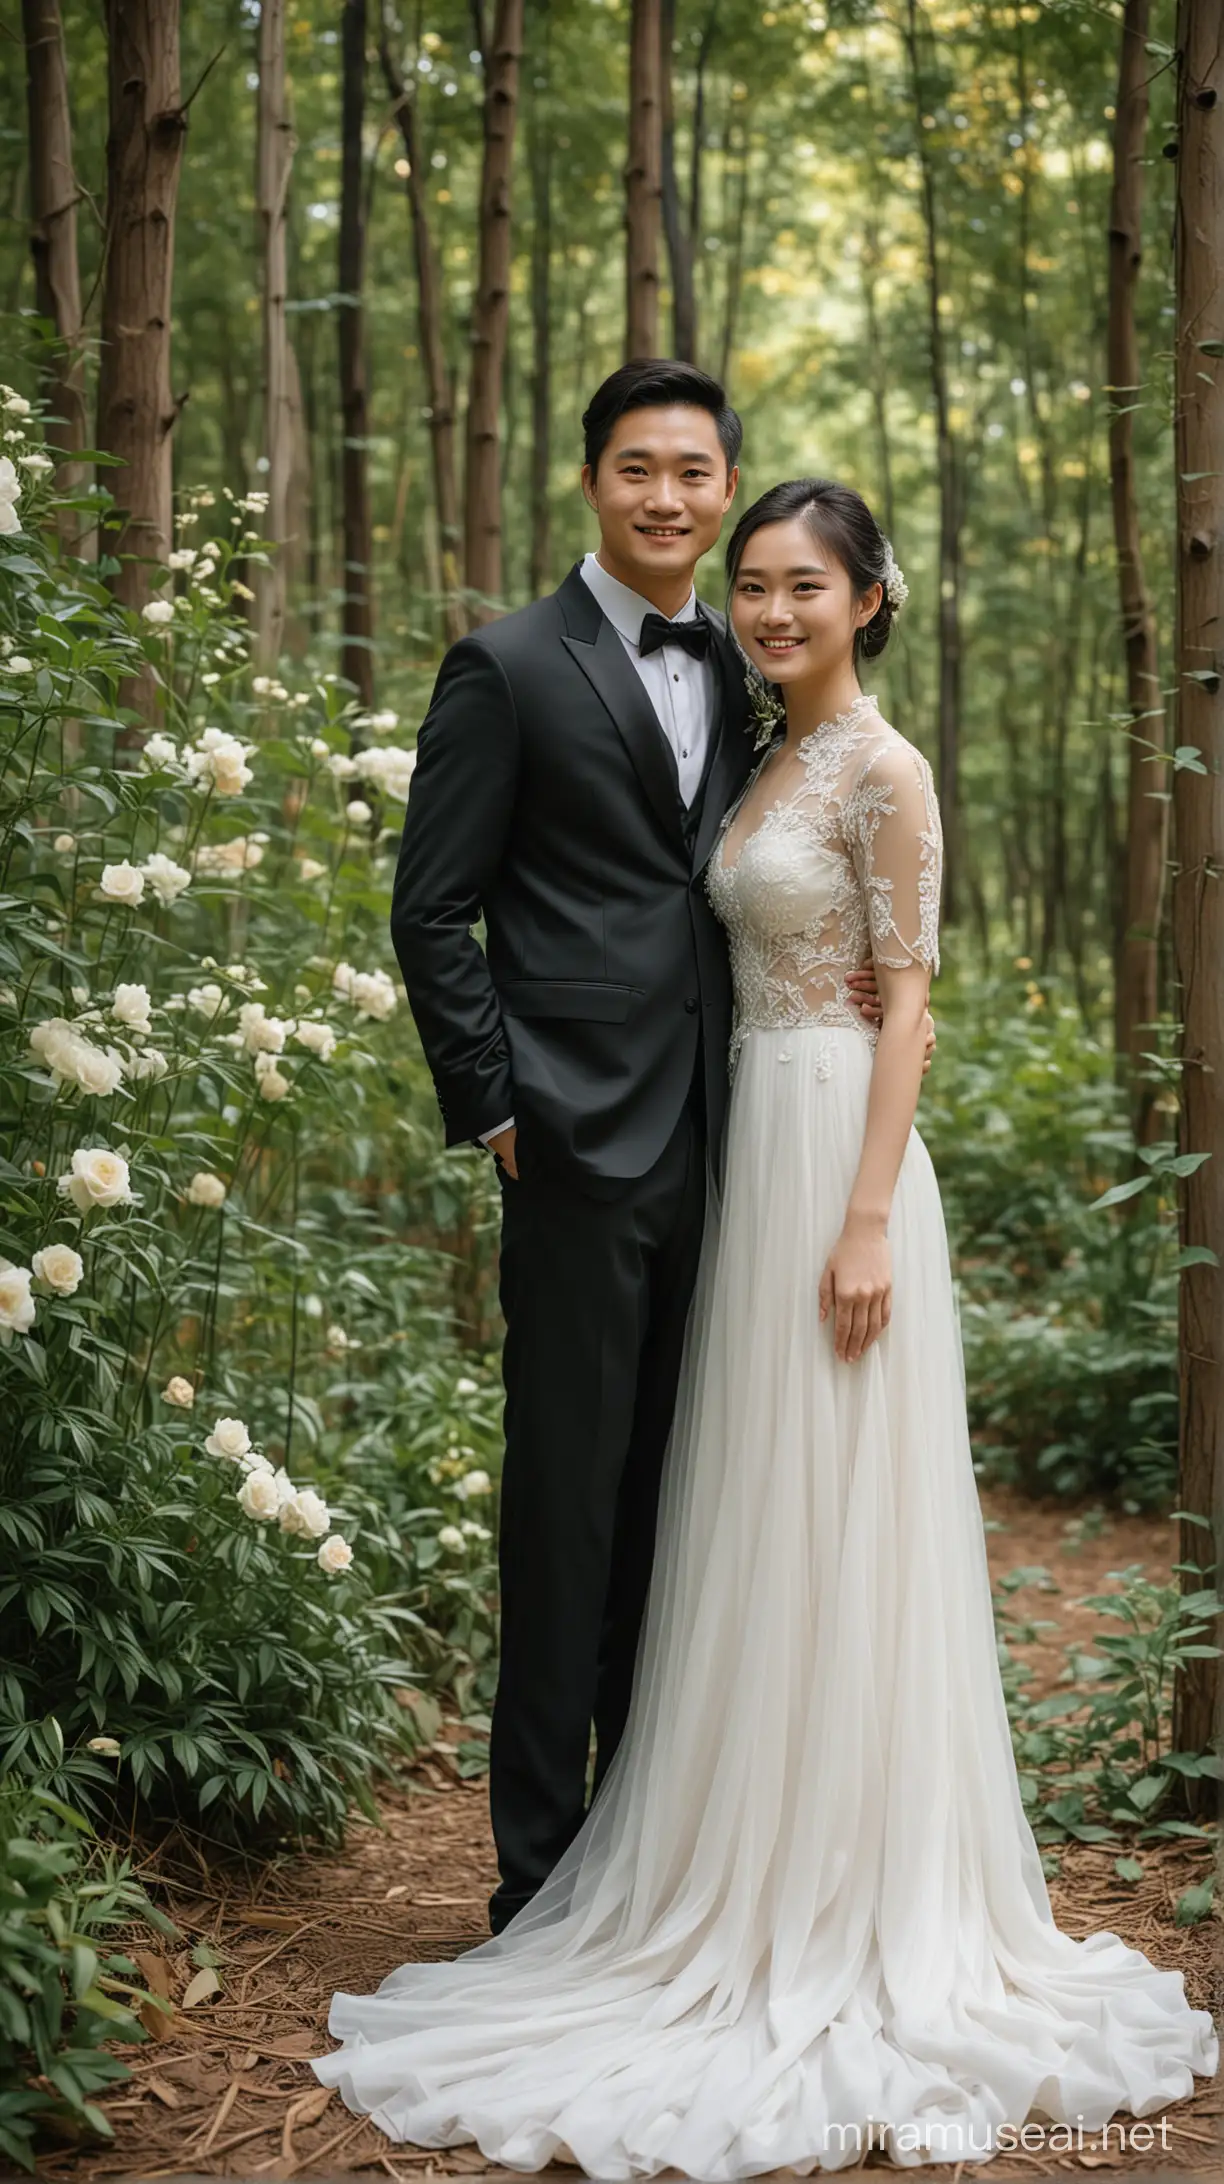 wedding photos,portrait photography,forest wedding dress,ream color,an elegant Chinese couple,girls  wearing an elegant white wedding dress ,man wearing a formal black suit, smiling,the two people look at the camera,plants,flowers,forests,light gold and dark gree,romantic